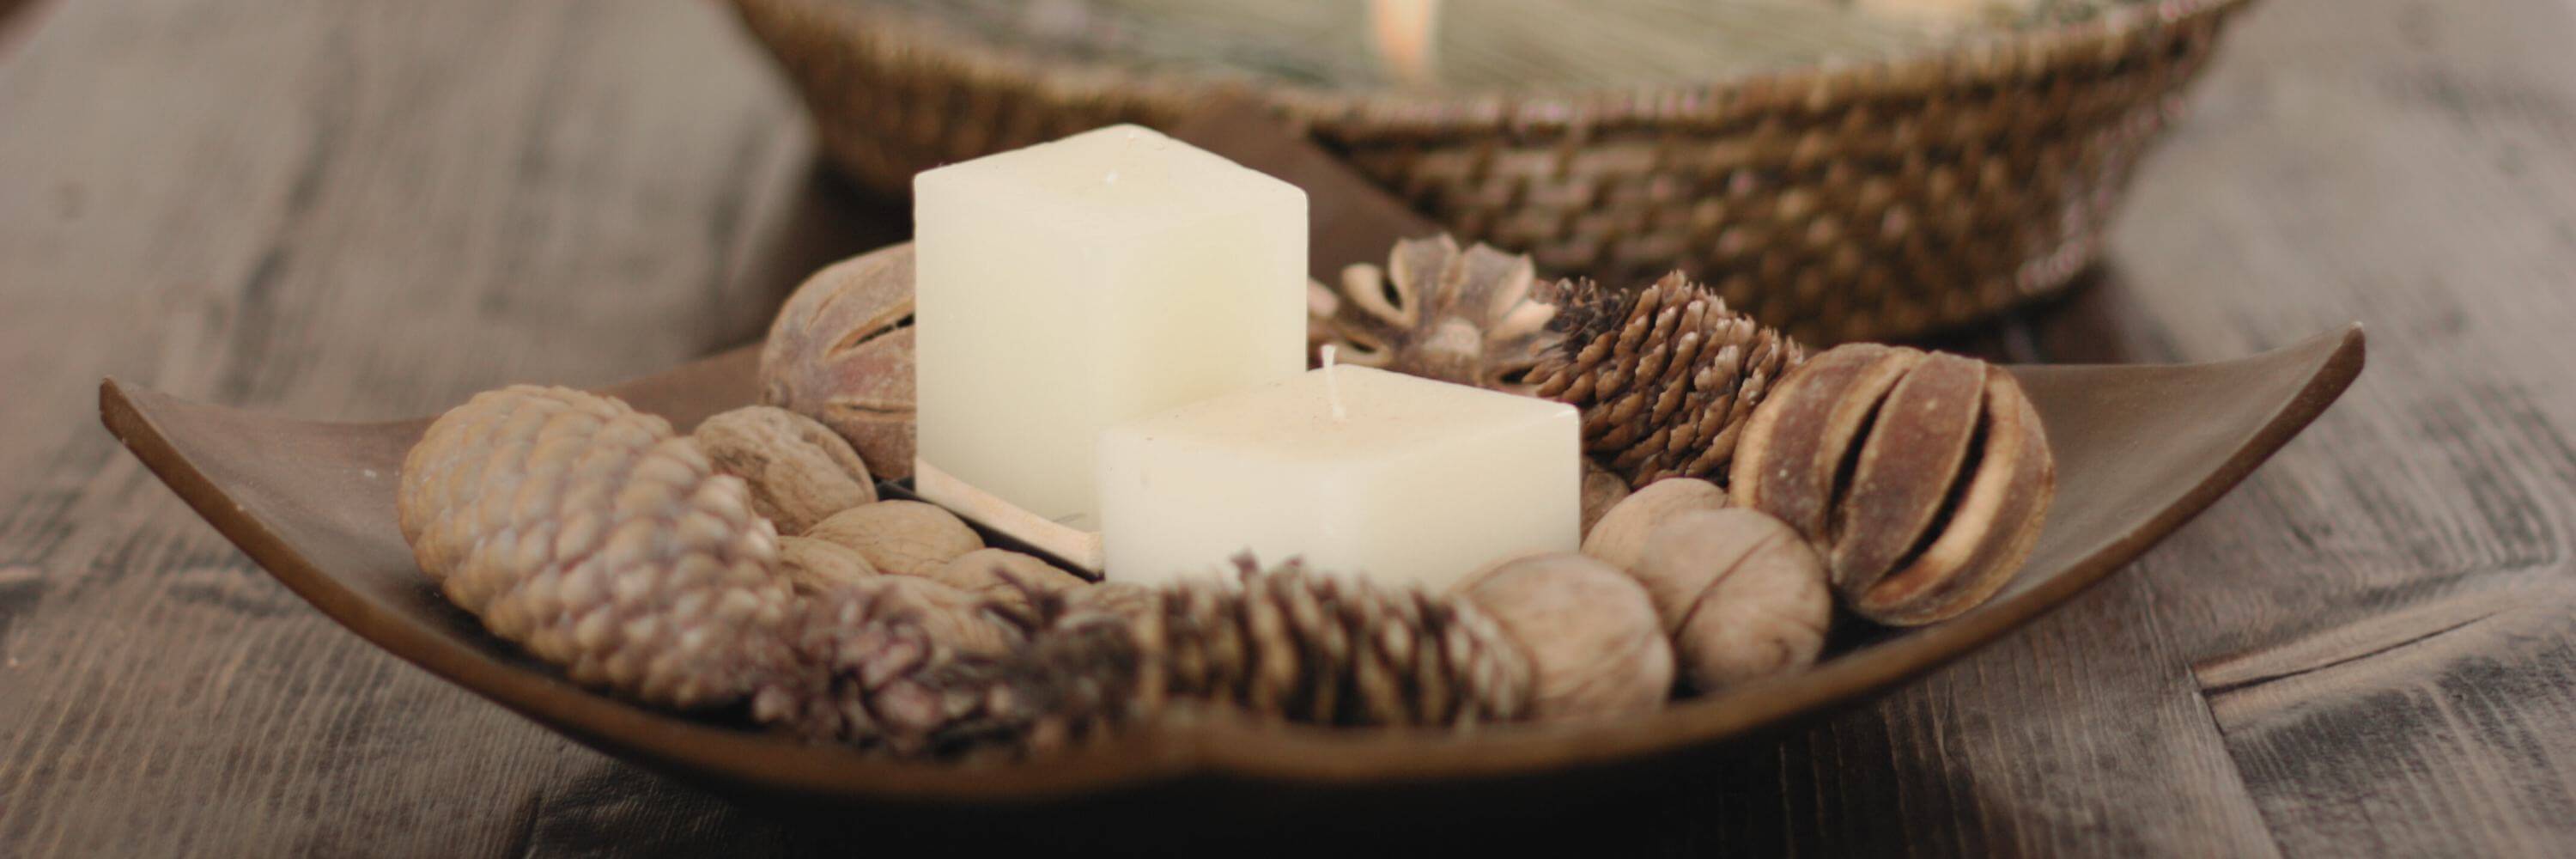 Rustic decoration with a wooden squared-shaped bowl